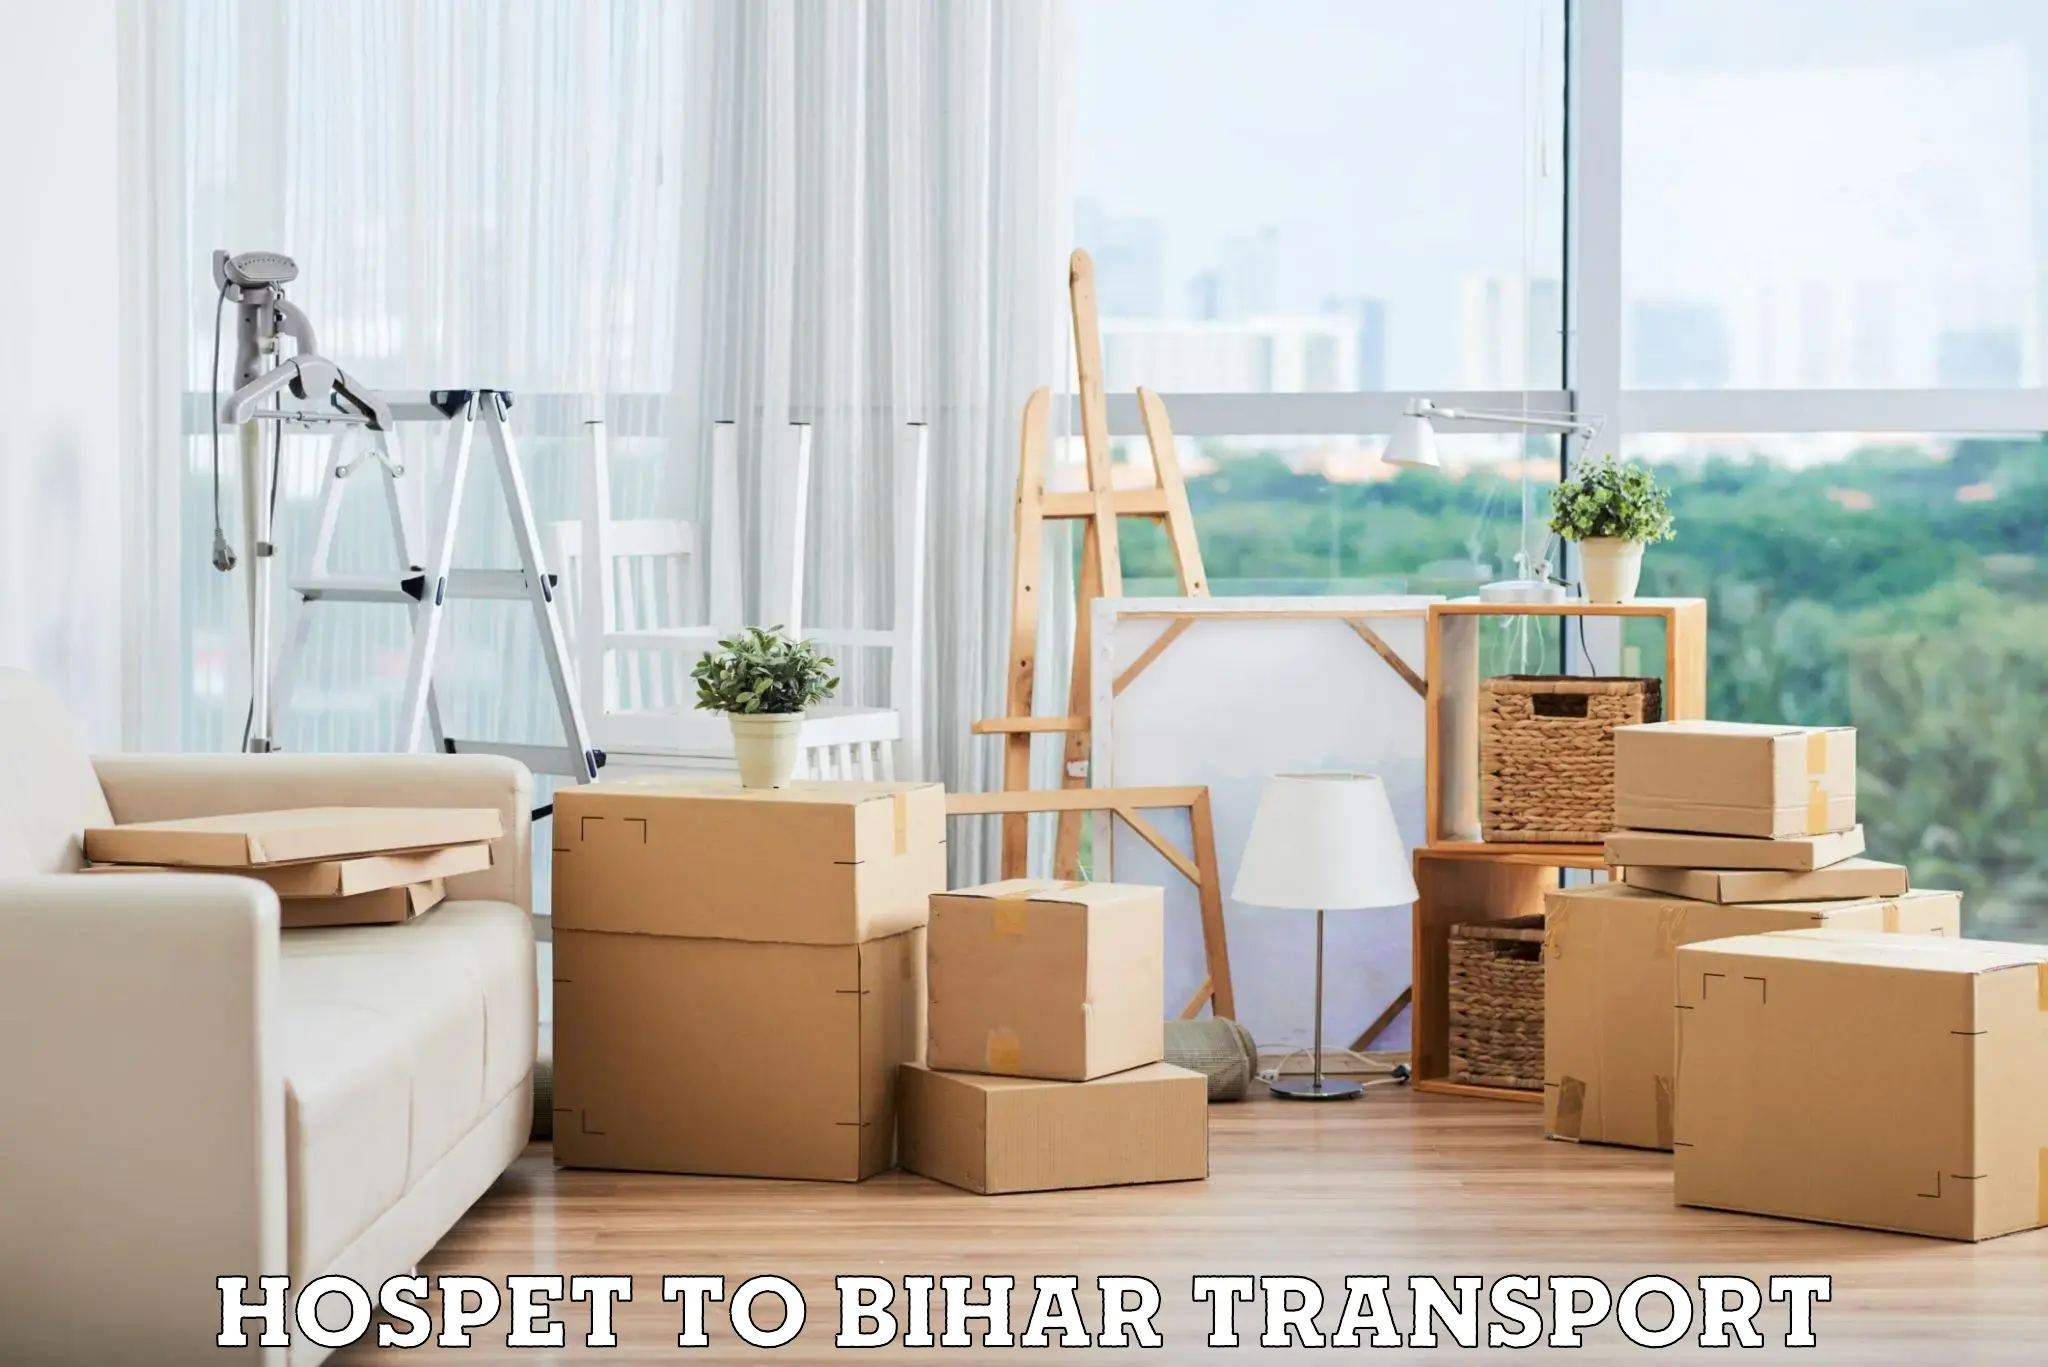 Part load transport service in India Hospet to Bhorey